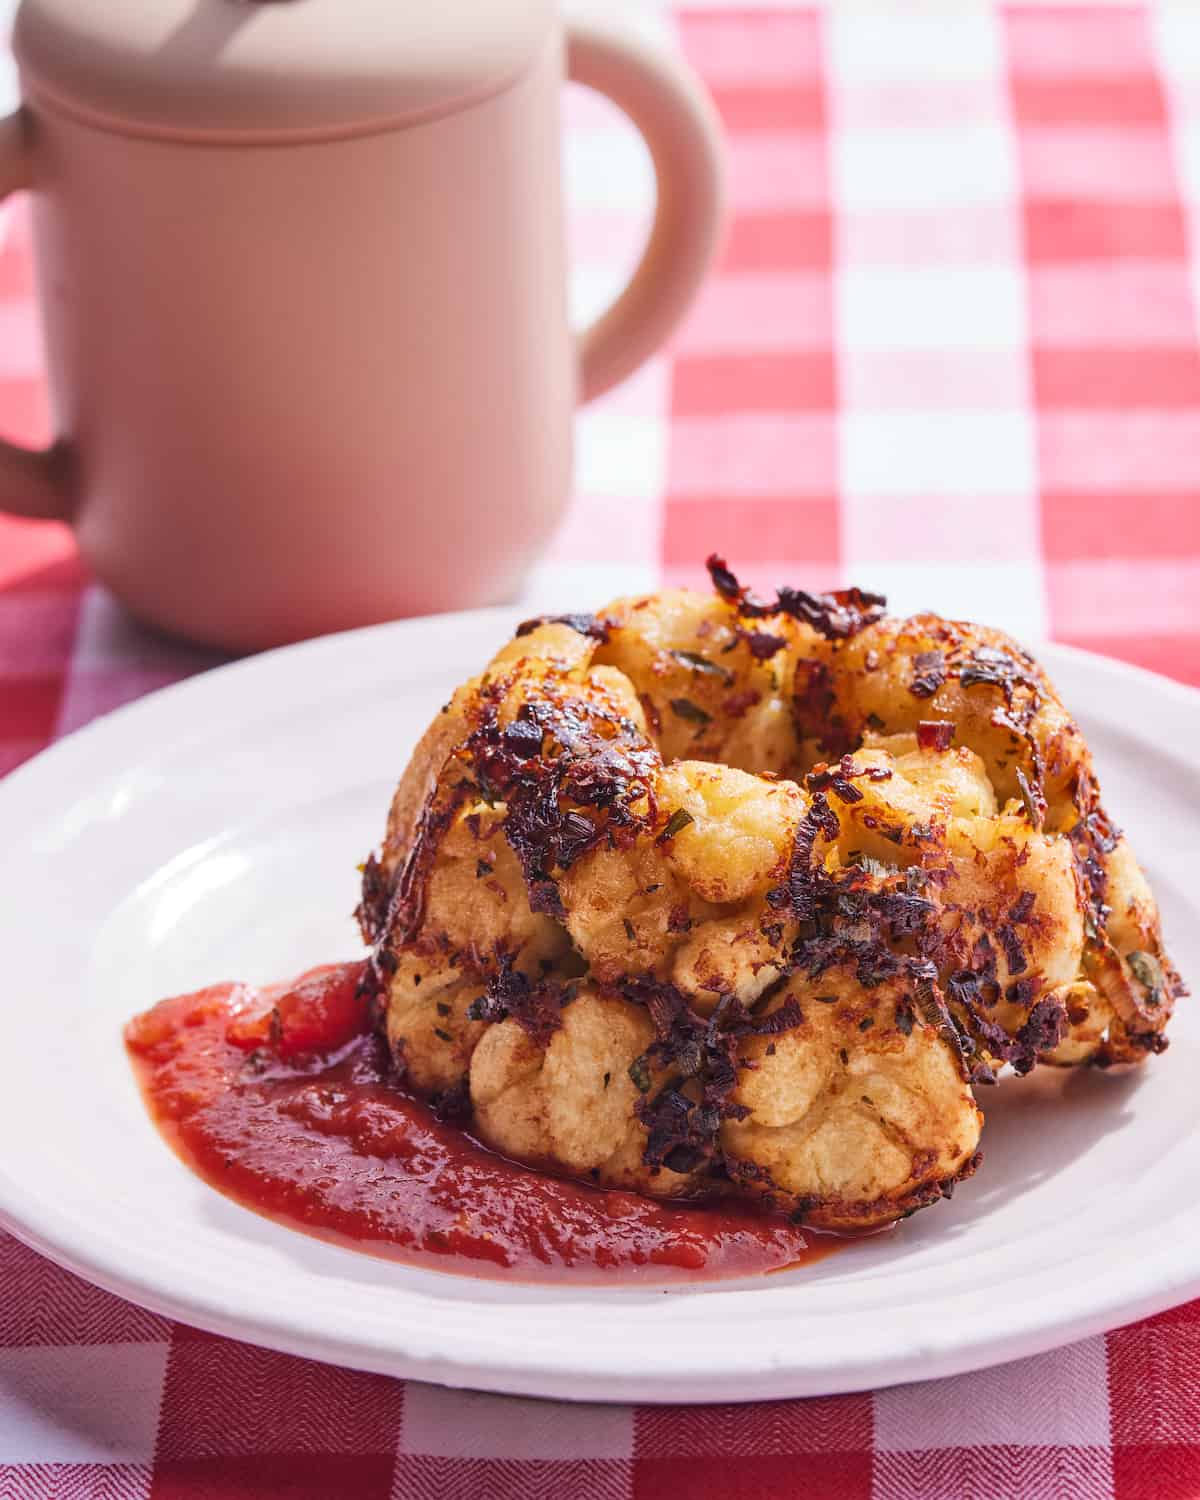 A piece of Pizza Monkey Bread and marinara sauce on a white ceramic plate in front of a pink sippy cup on a red and white checkered table cloth.